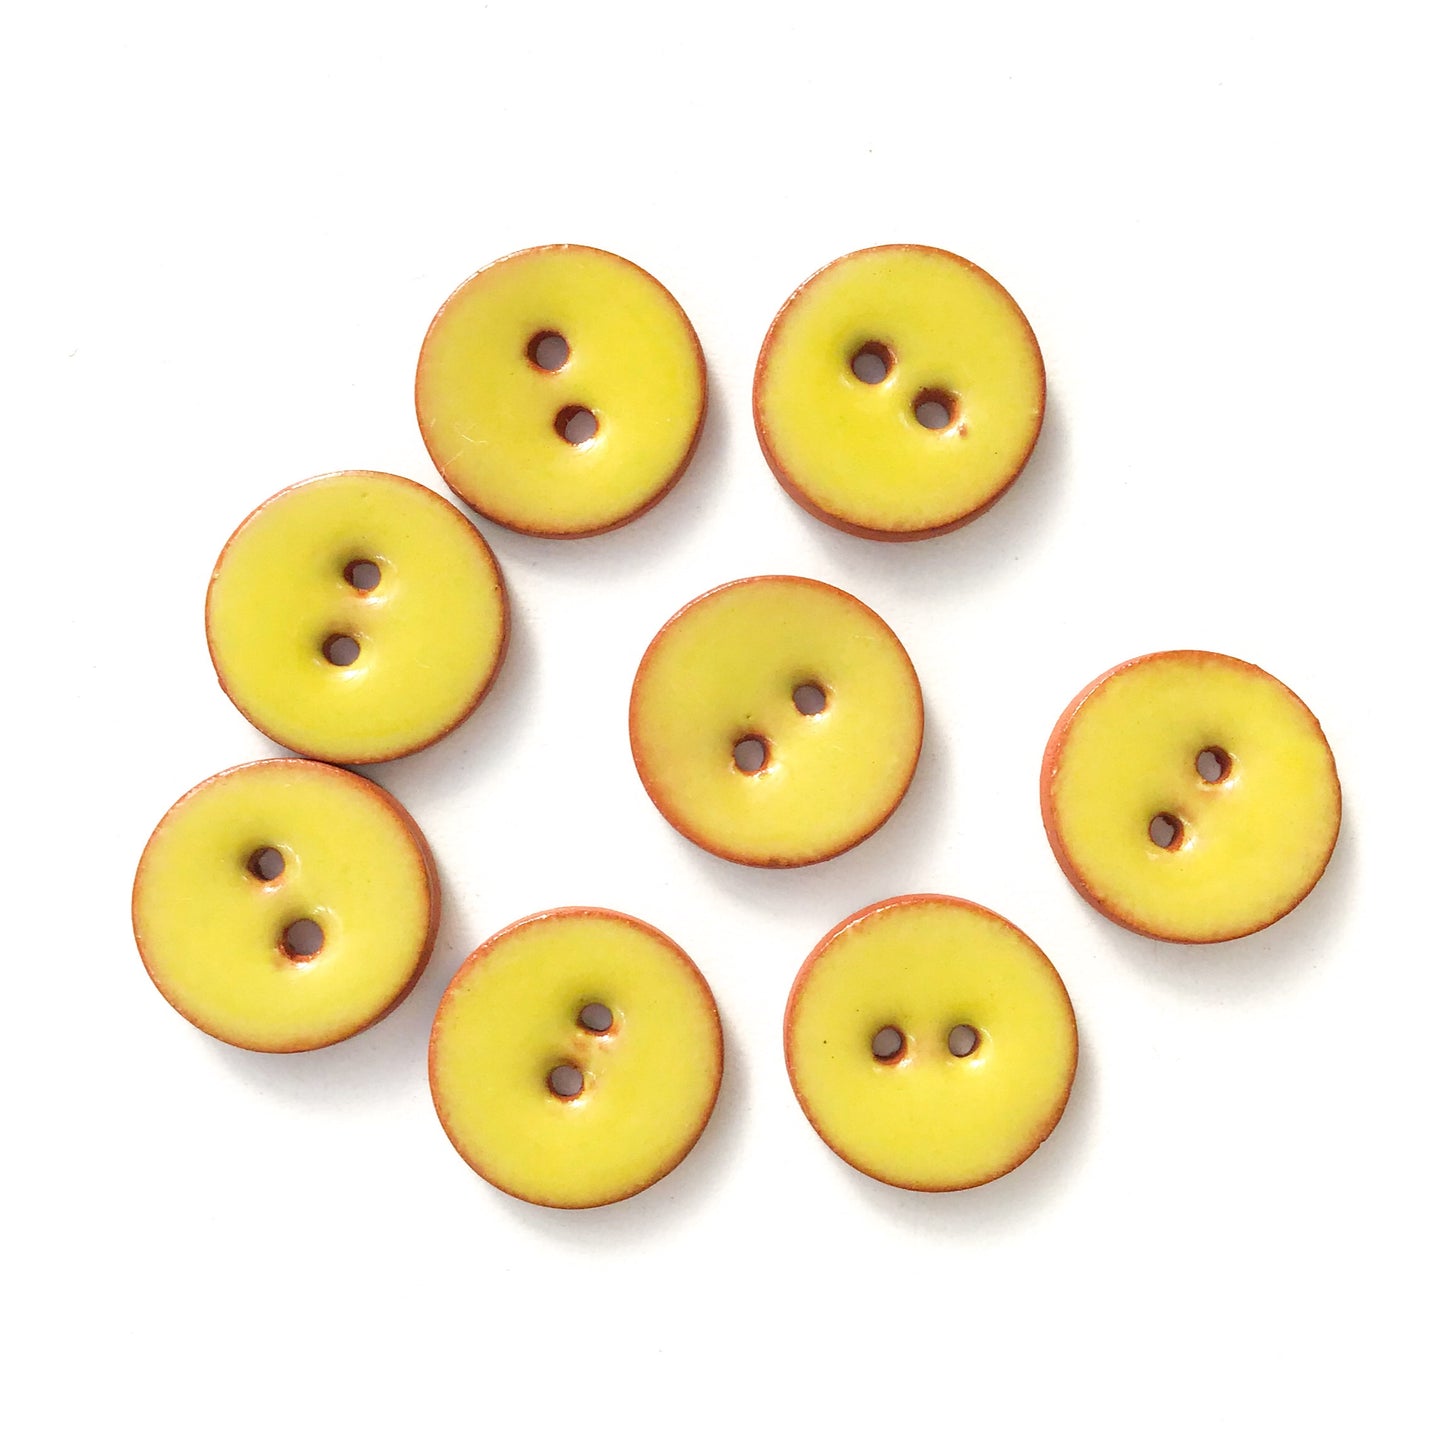 Chartreuse Ceramic Buttons - Clay Buttons - 5/8" - 9 Pack (ws-44)